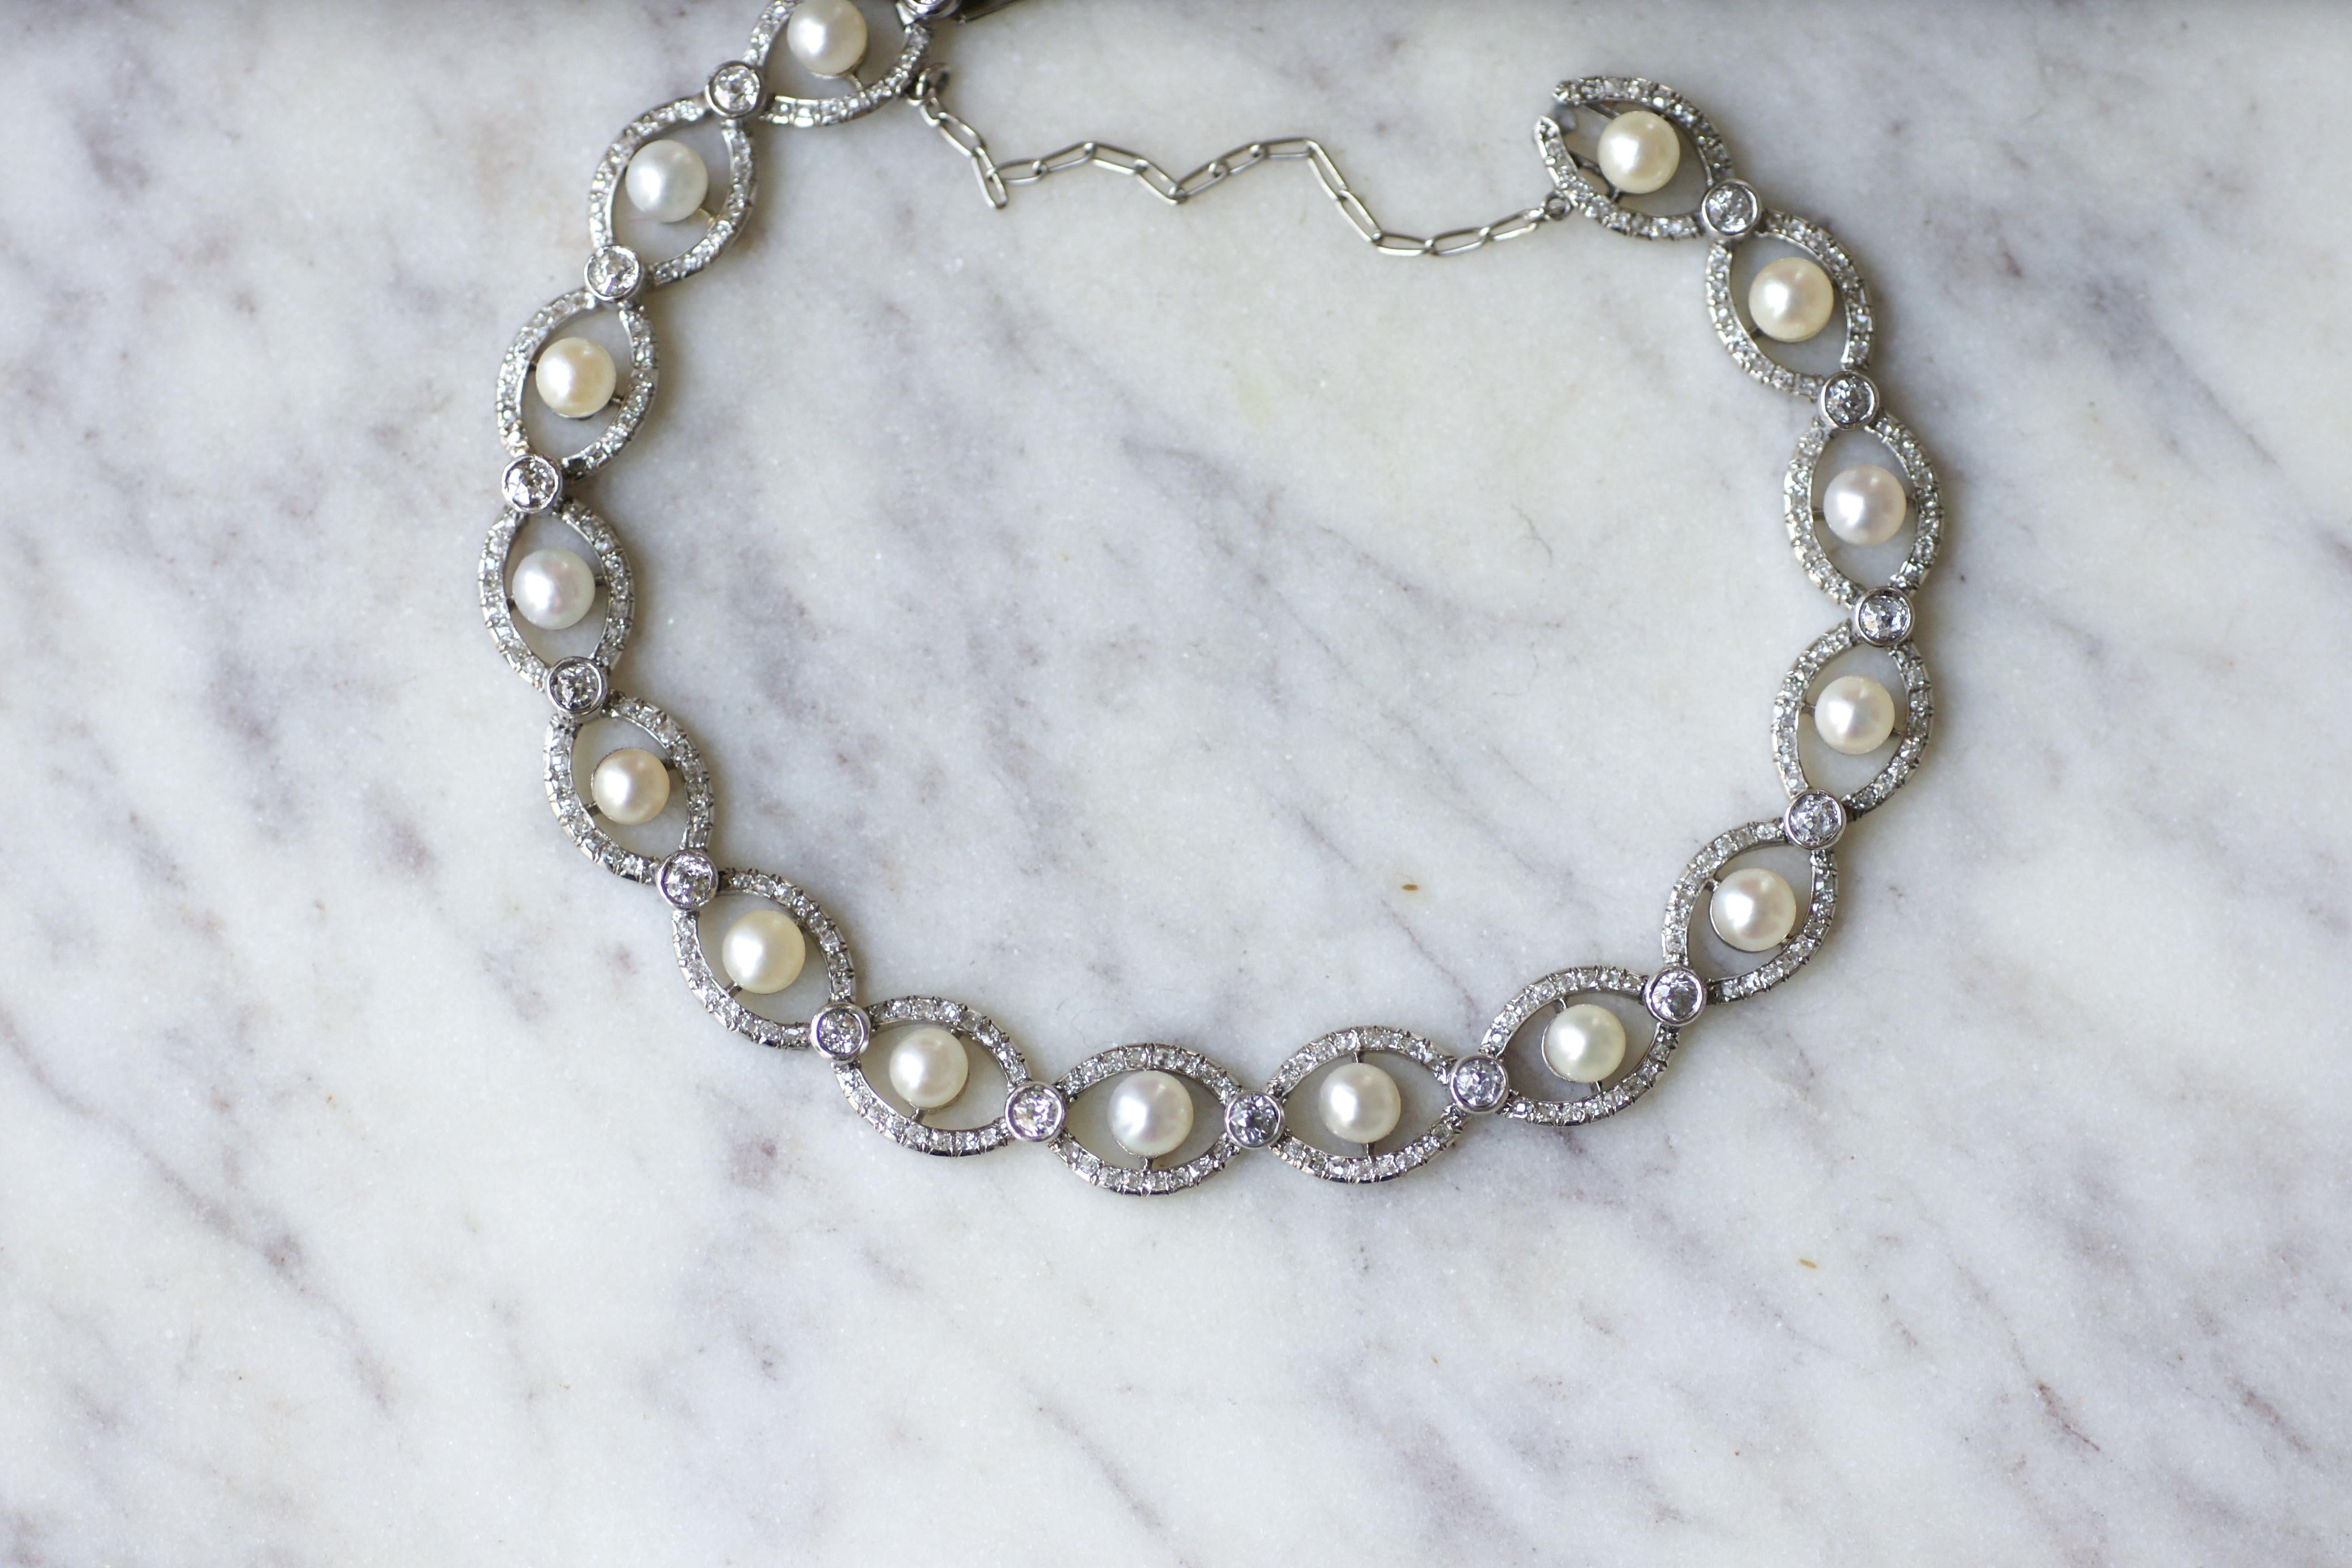 Women's or Men's Edwardian Platinum Bracelet with Certified Natural Pearls and Diamonds